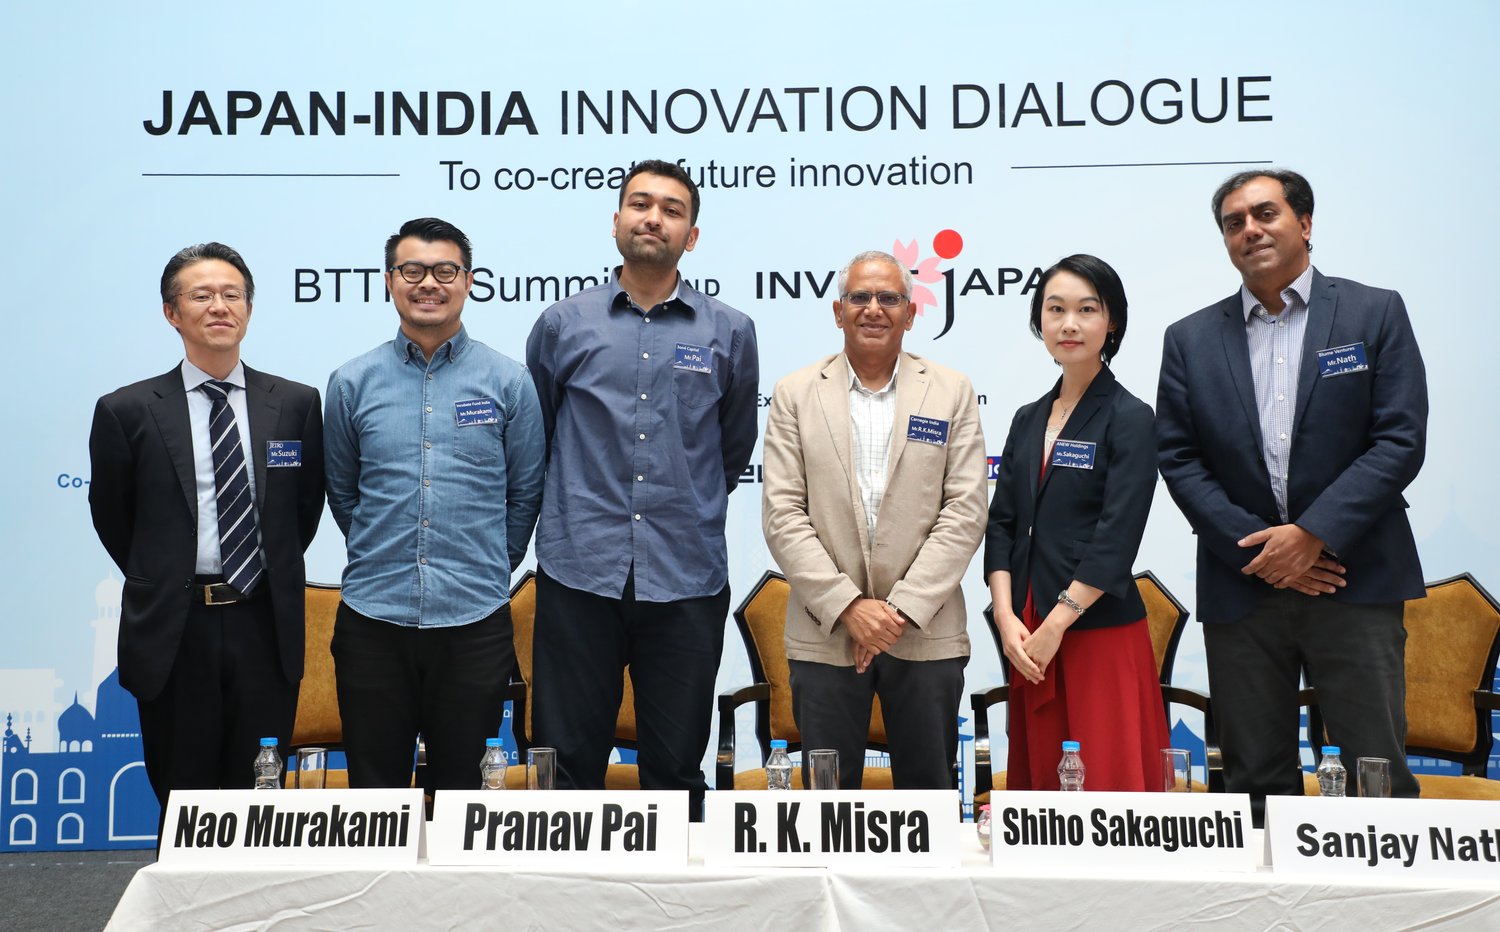 Supporting an India-Japan Partnership in Technology and Investment to pursue the Global Innovation of Japanese Corporations at the Fourth Summit of Bengaluru Tokyo Technology Initiative (BTTI)